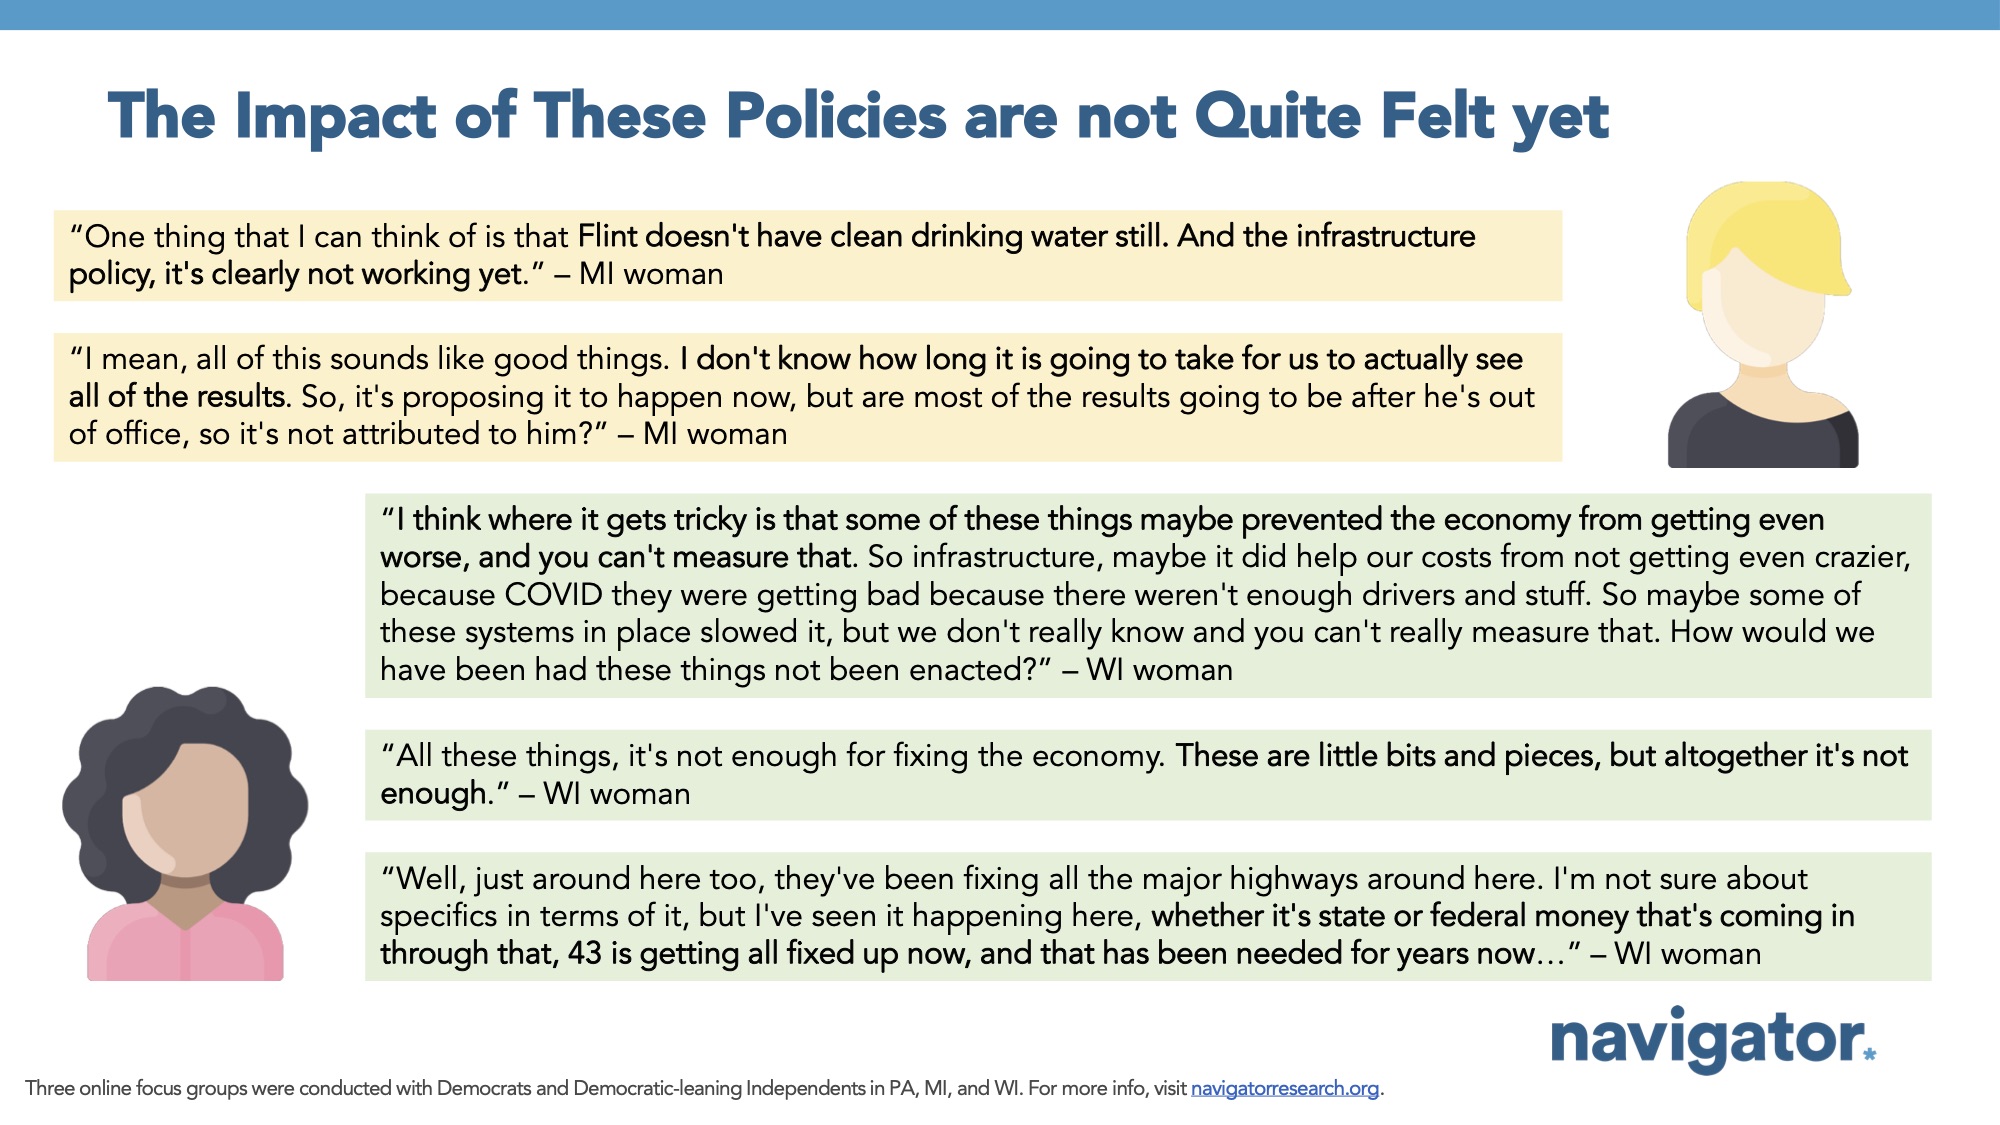 Focus group report slide titled: The Impact of These Policies are not Quite Felt yet